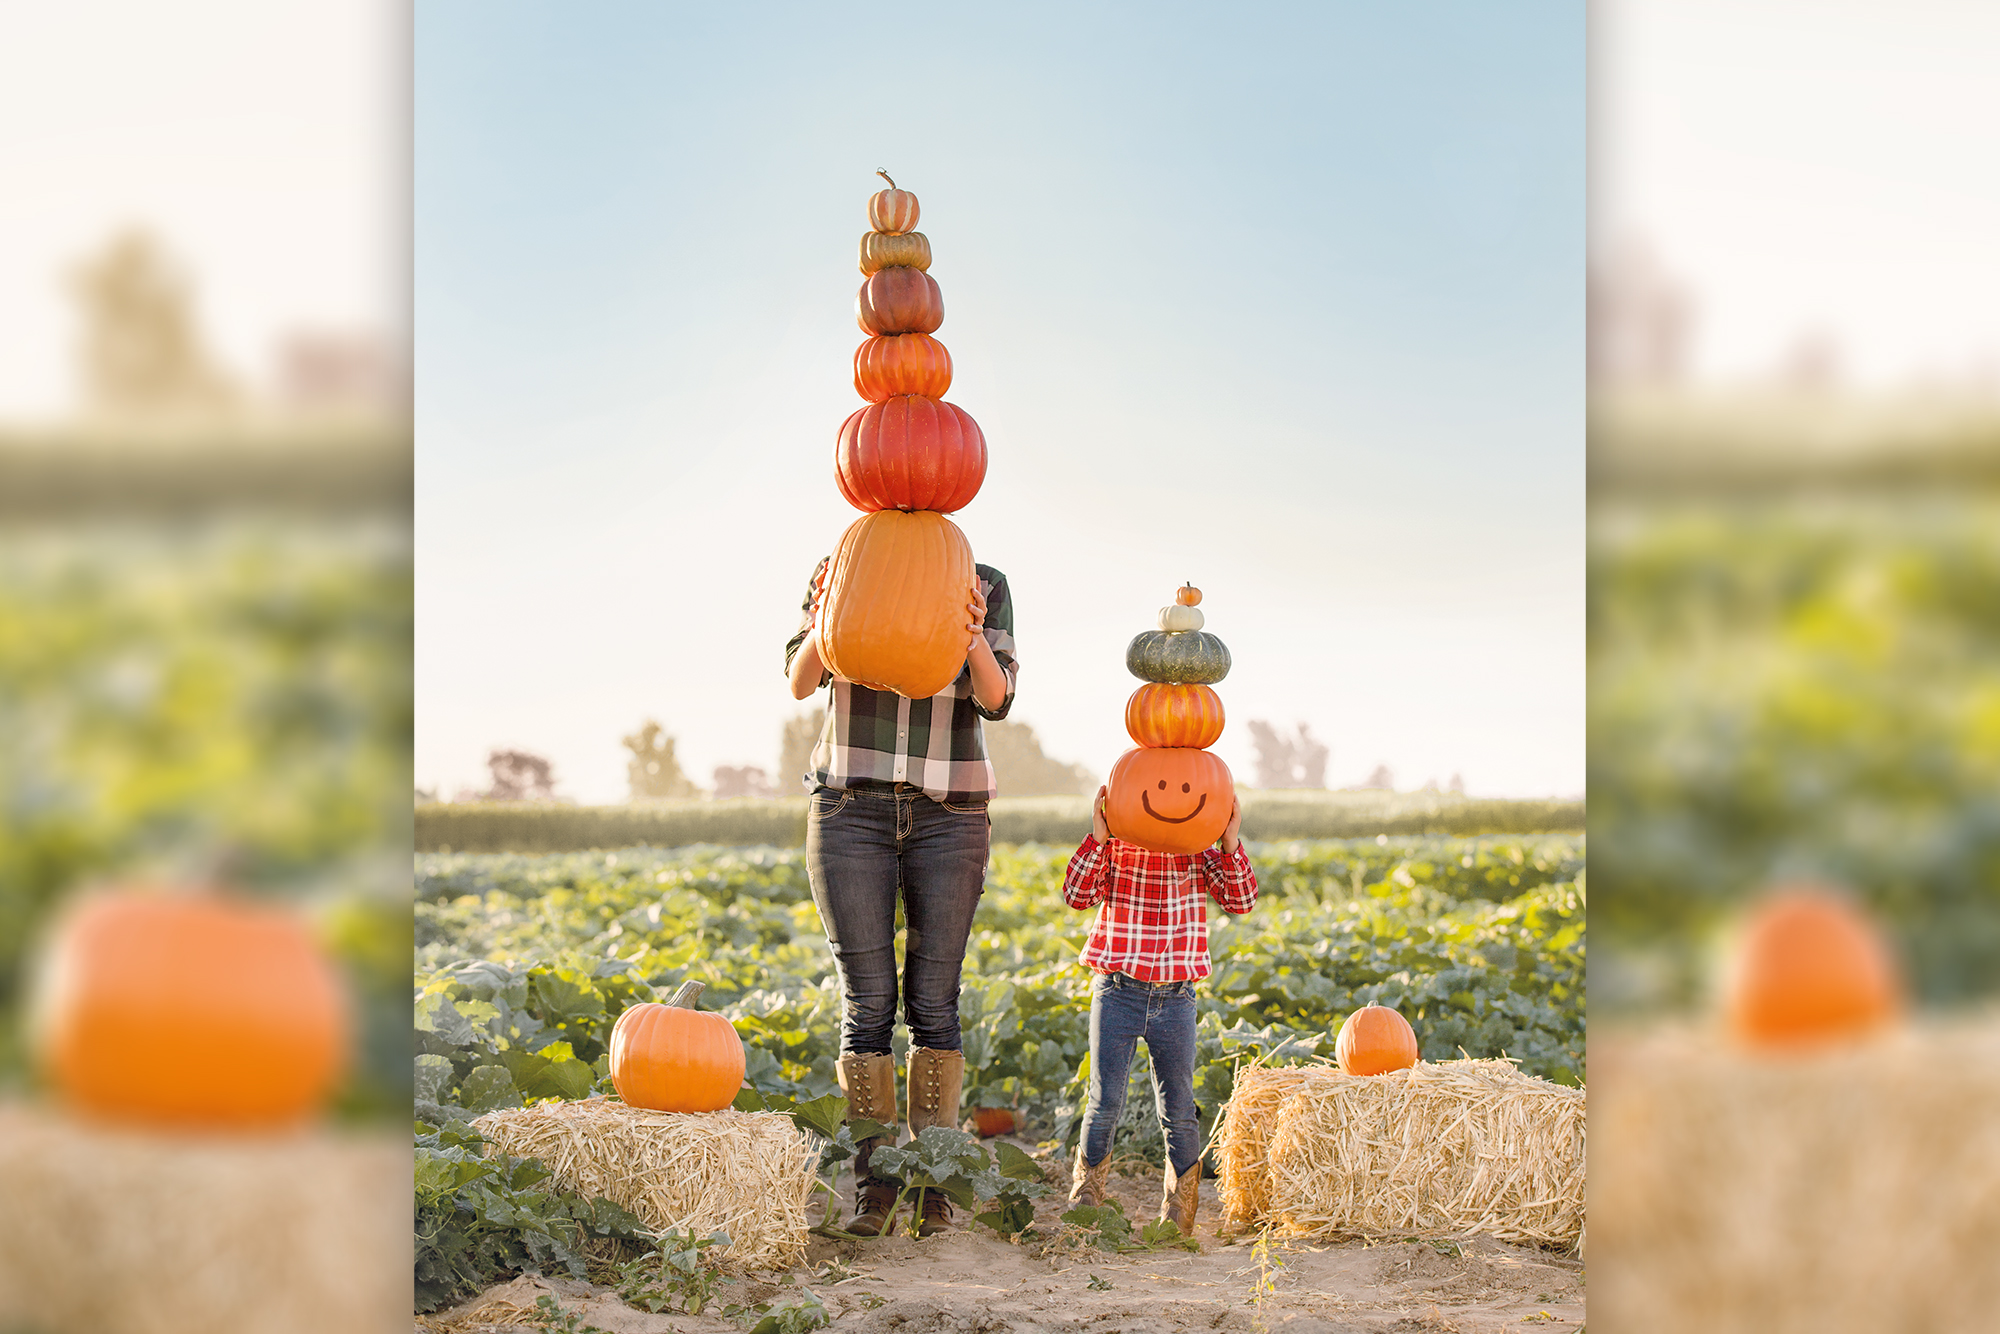 Celebrate National Pumpkin Day with these tips